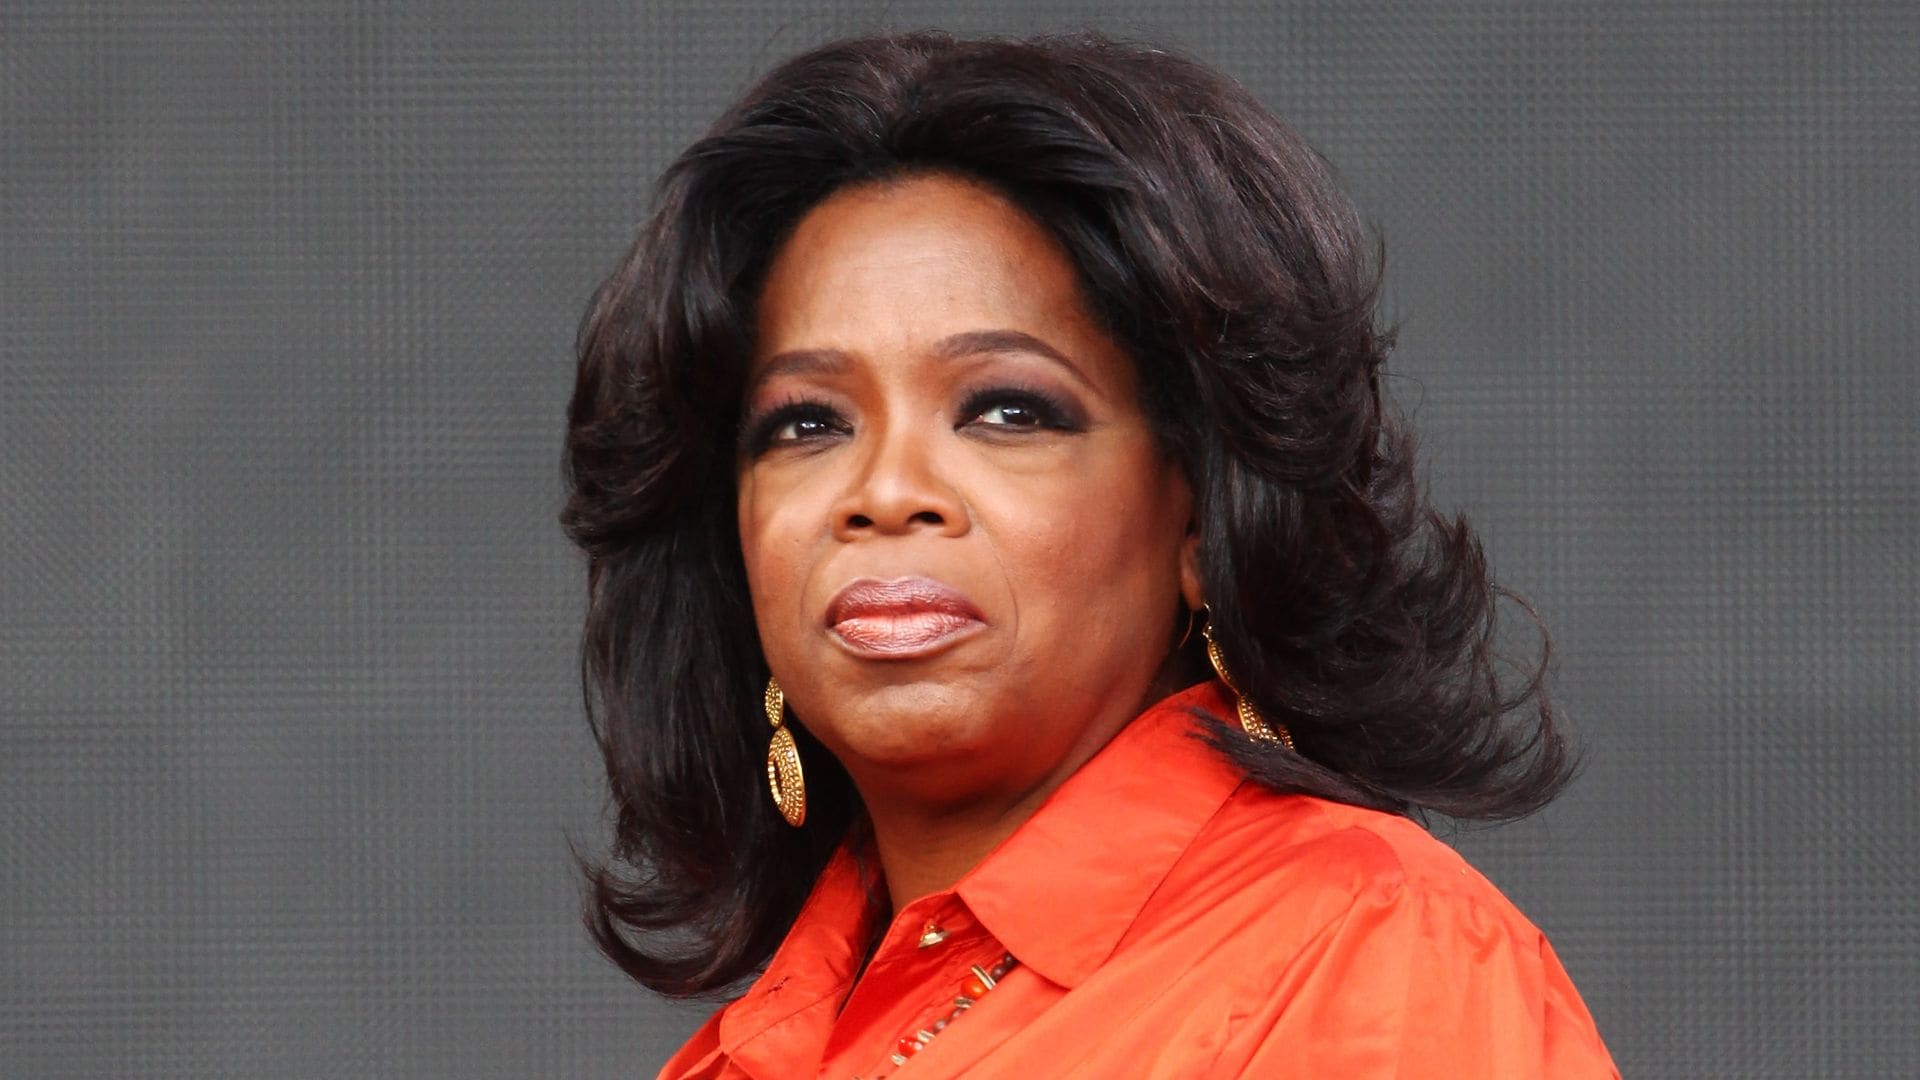 Oprah Winfrey reflects on her relationship with weight and years of public mockery